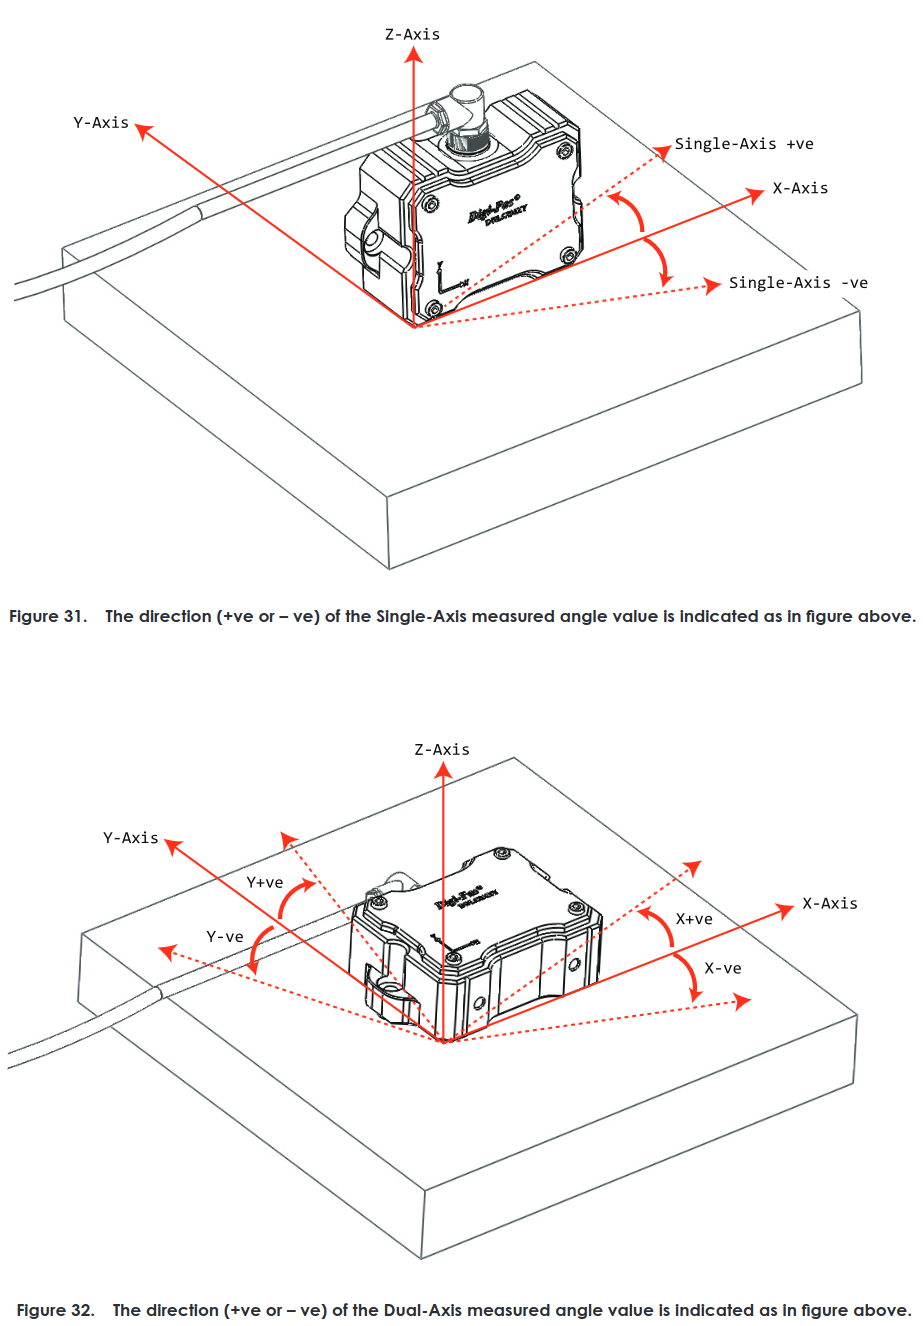 Graphic about mounting styles from the instruction manual